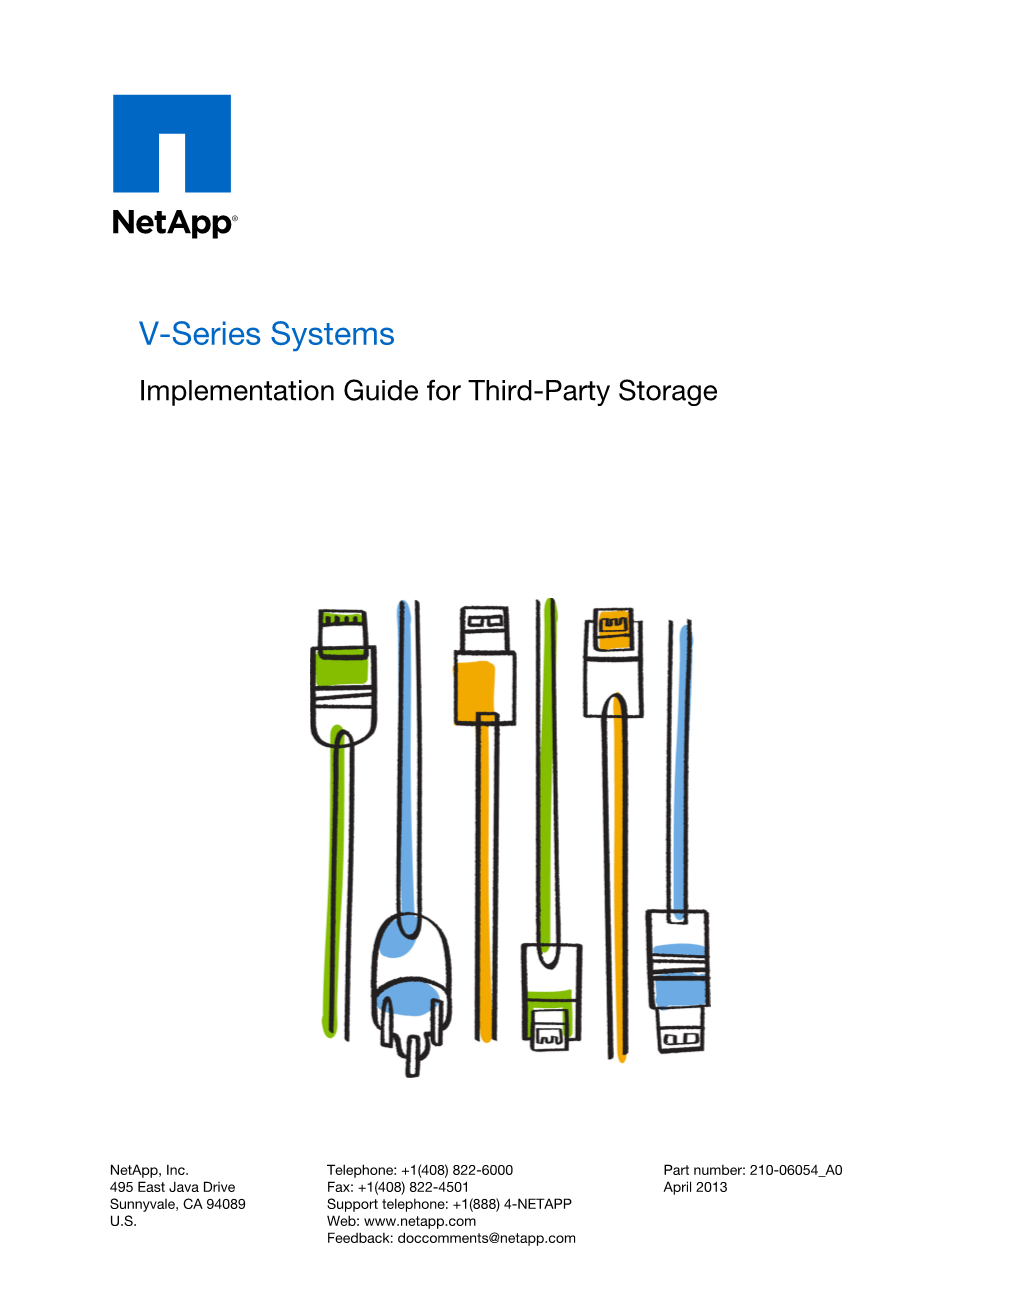 V-Series Systems Implementation Guide for Third-Party Storage